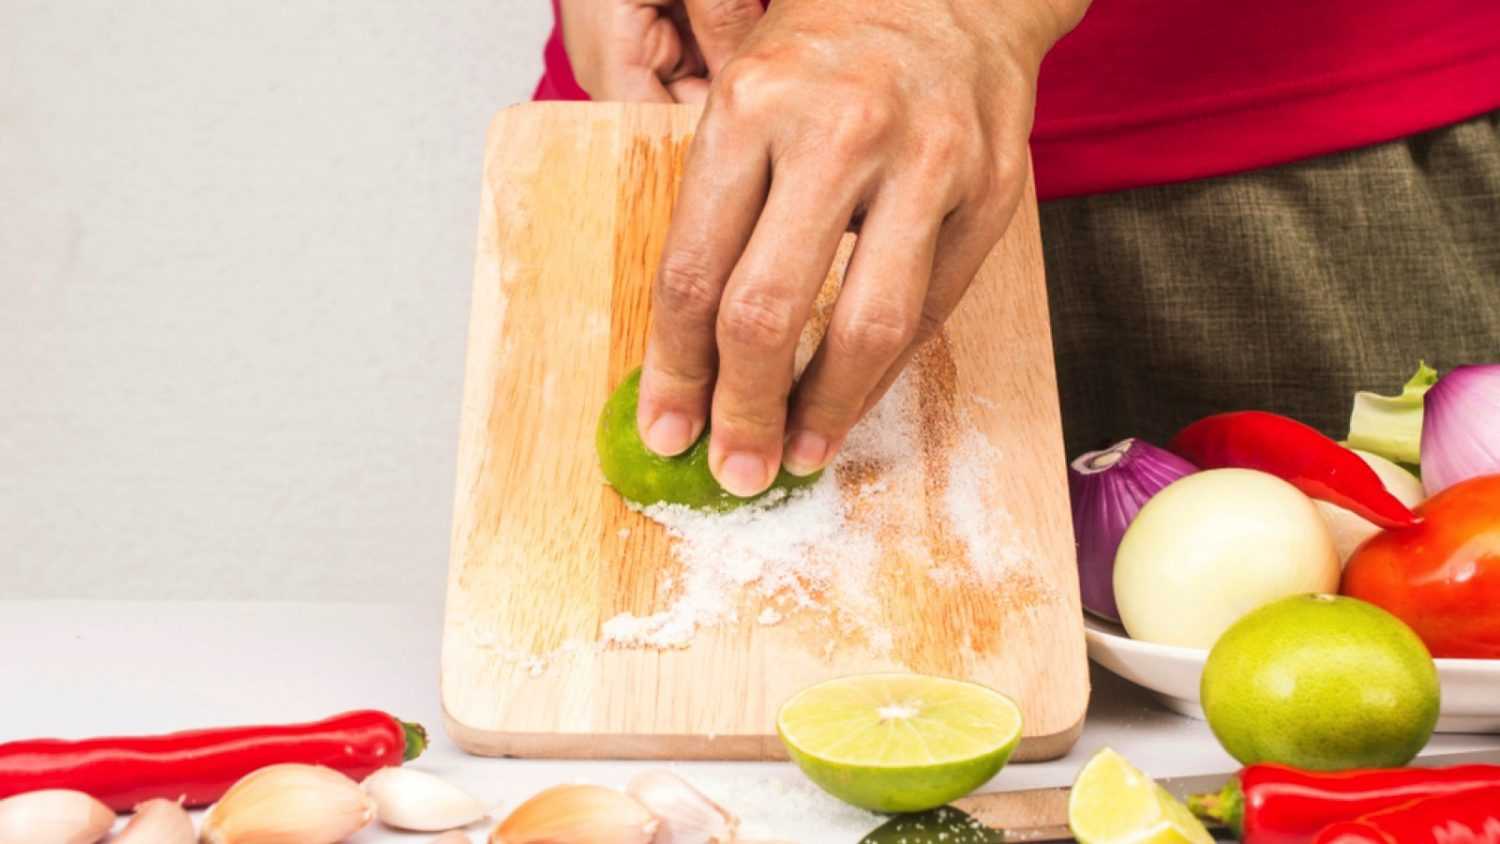 Cleaning choping board with lemon and salt